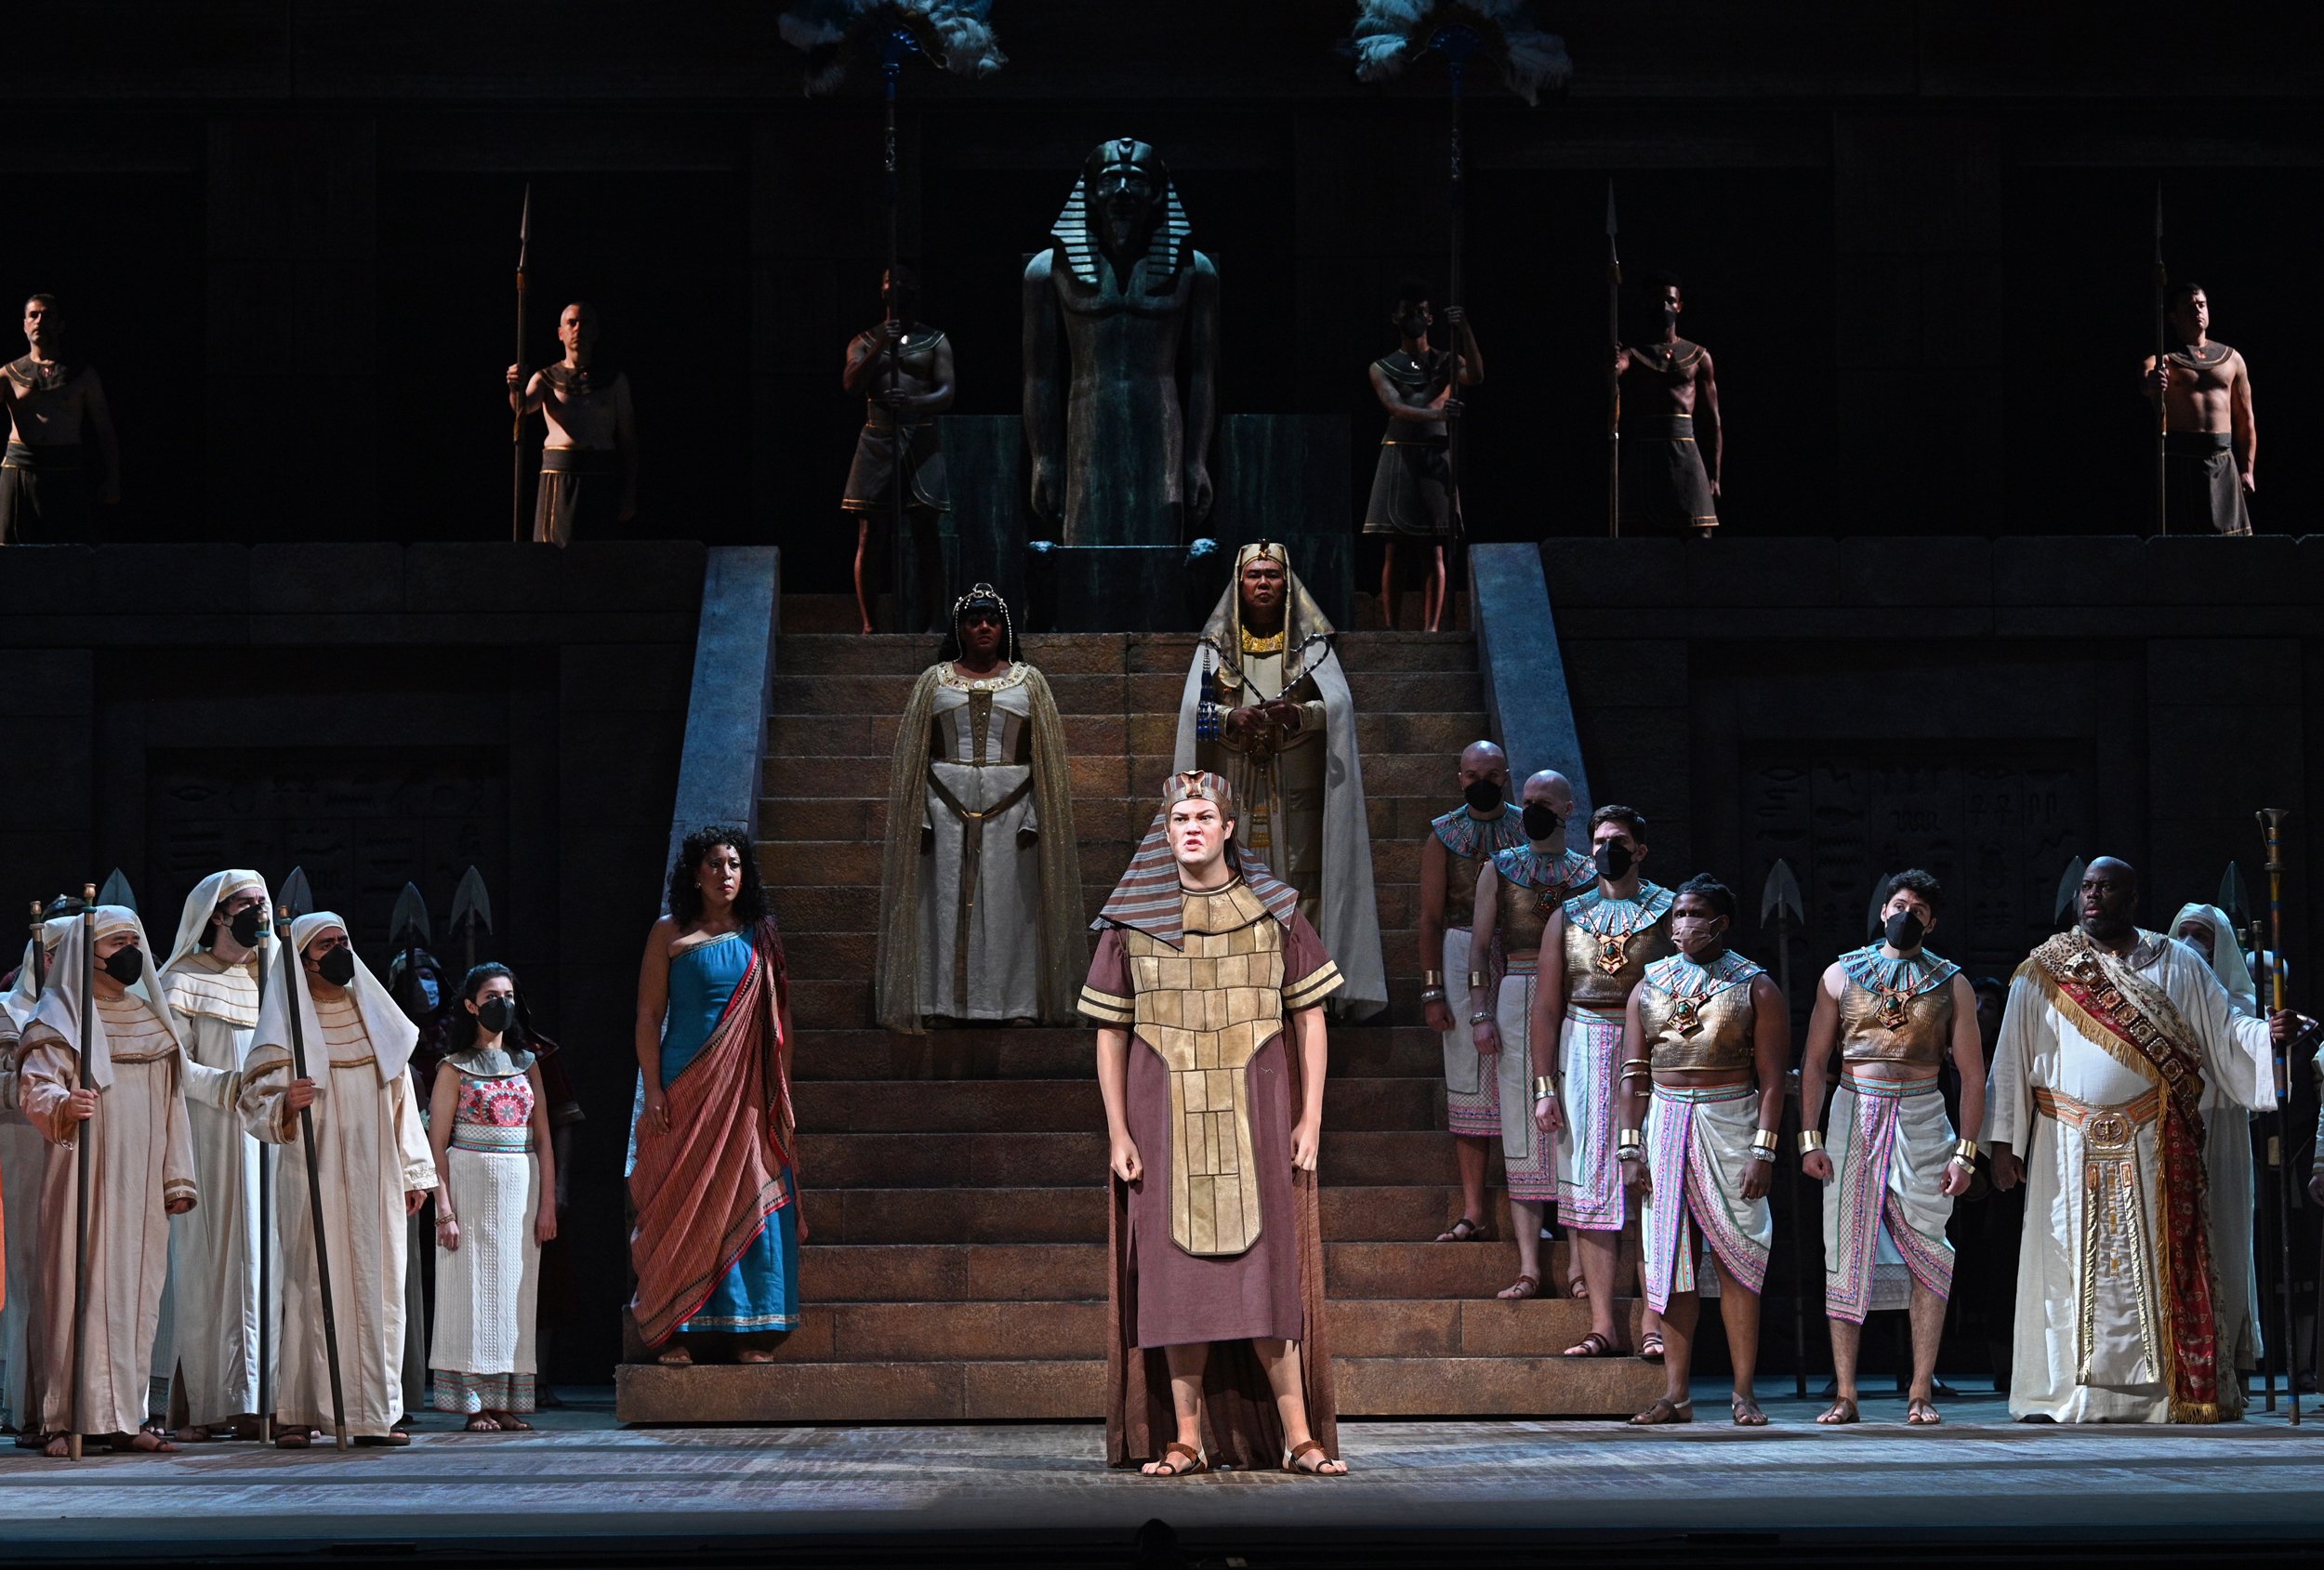  Houston Tyrrell as the Messenger (foreground) with Mary Elizabeth Williams as Aida, Tichina Vaughn as Amneris, and Peixin Chen as the King of Egypt. Photo by Philip Groshong. 